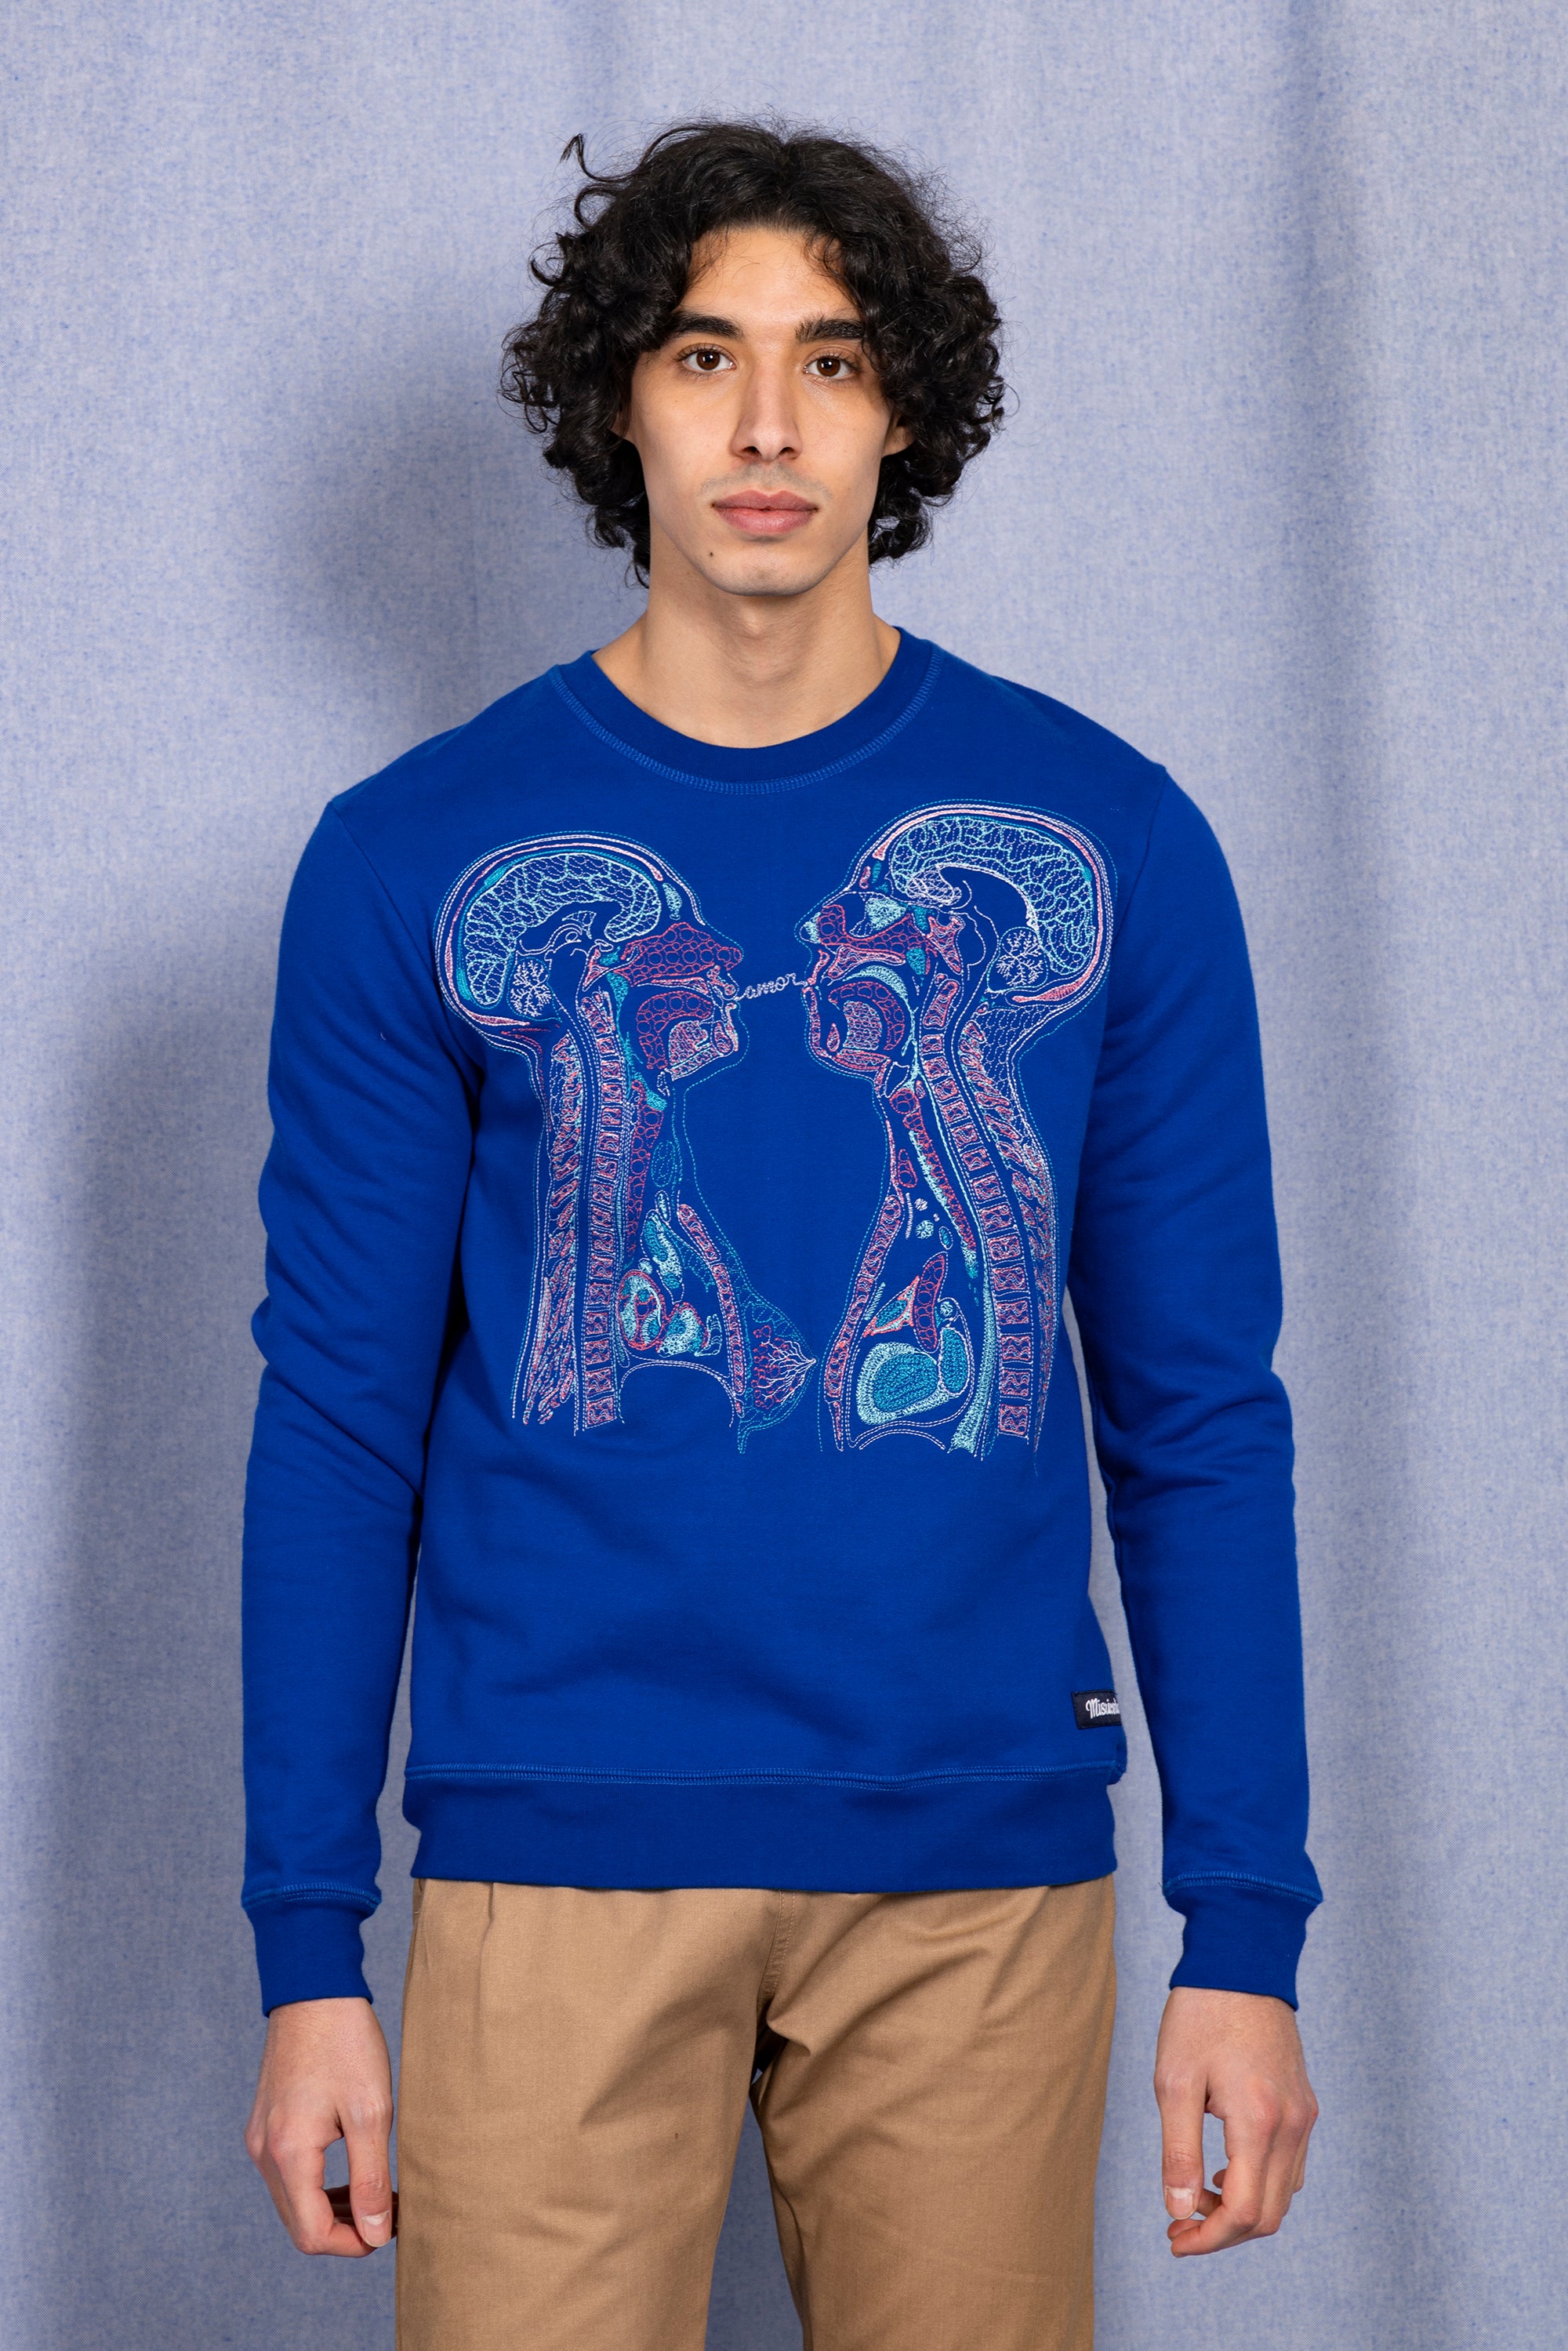 Sapphire blue sweater for men, ethical cotton, Peru embroidery